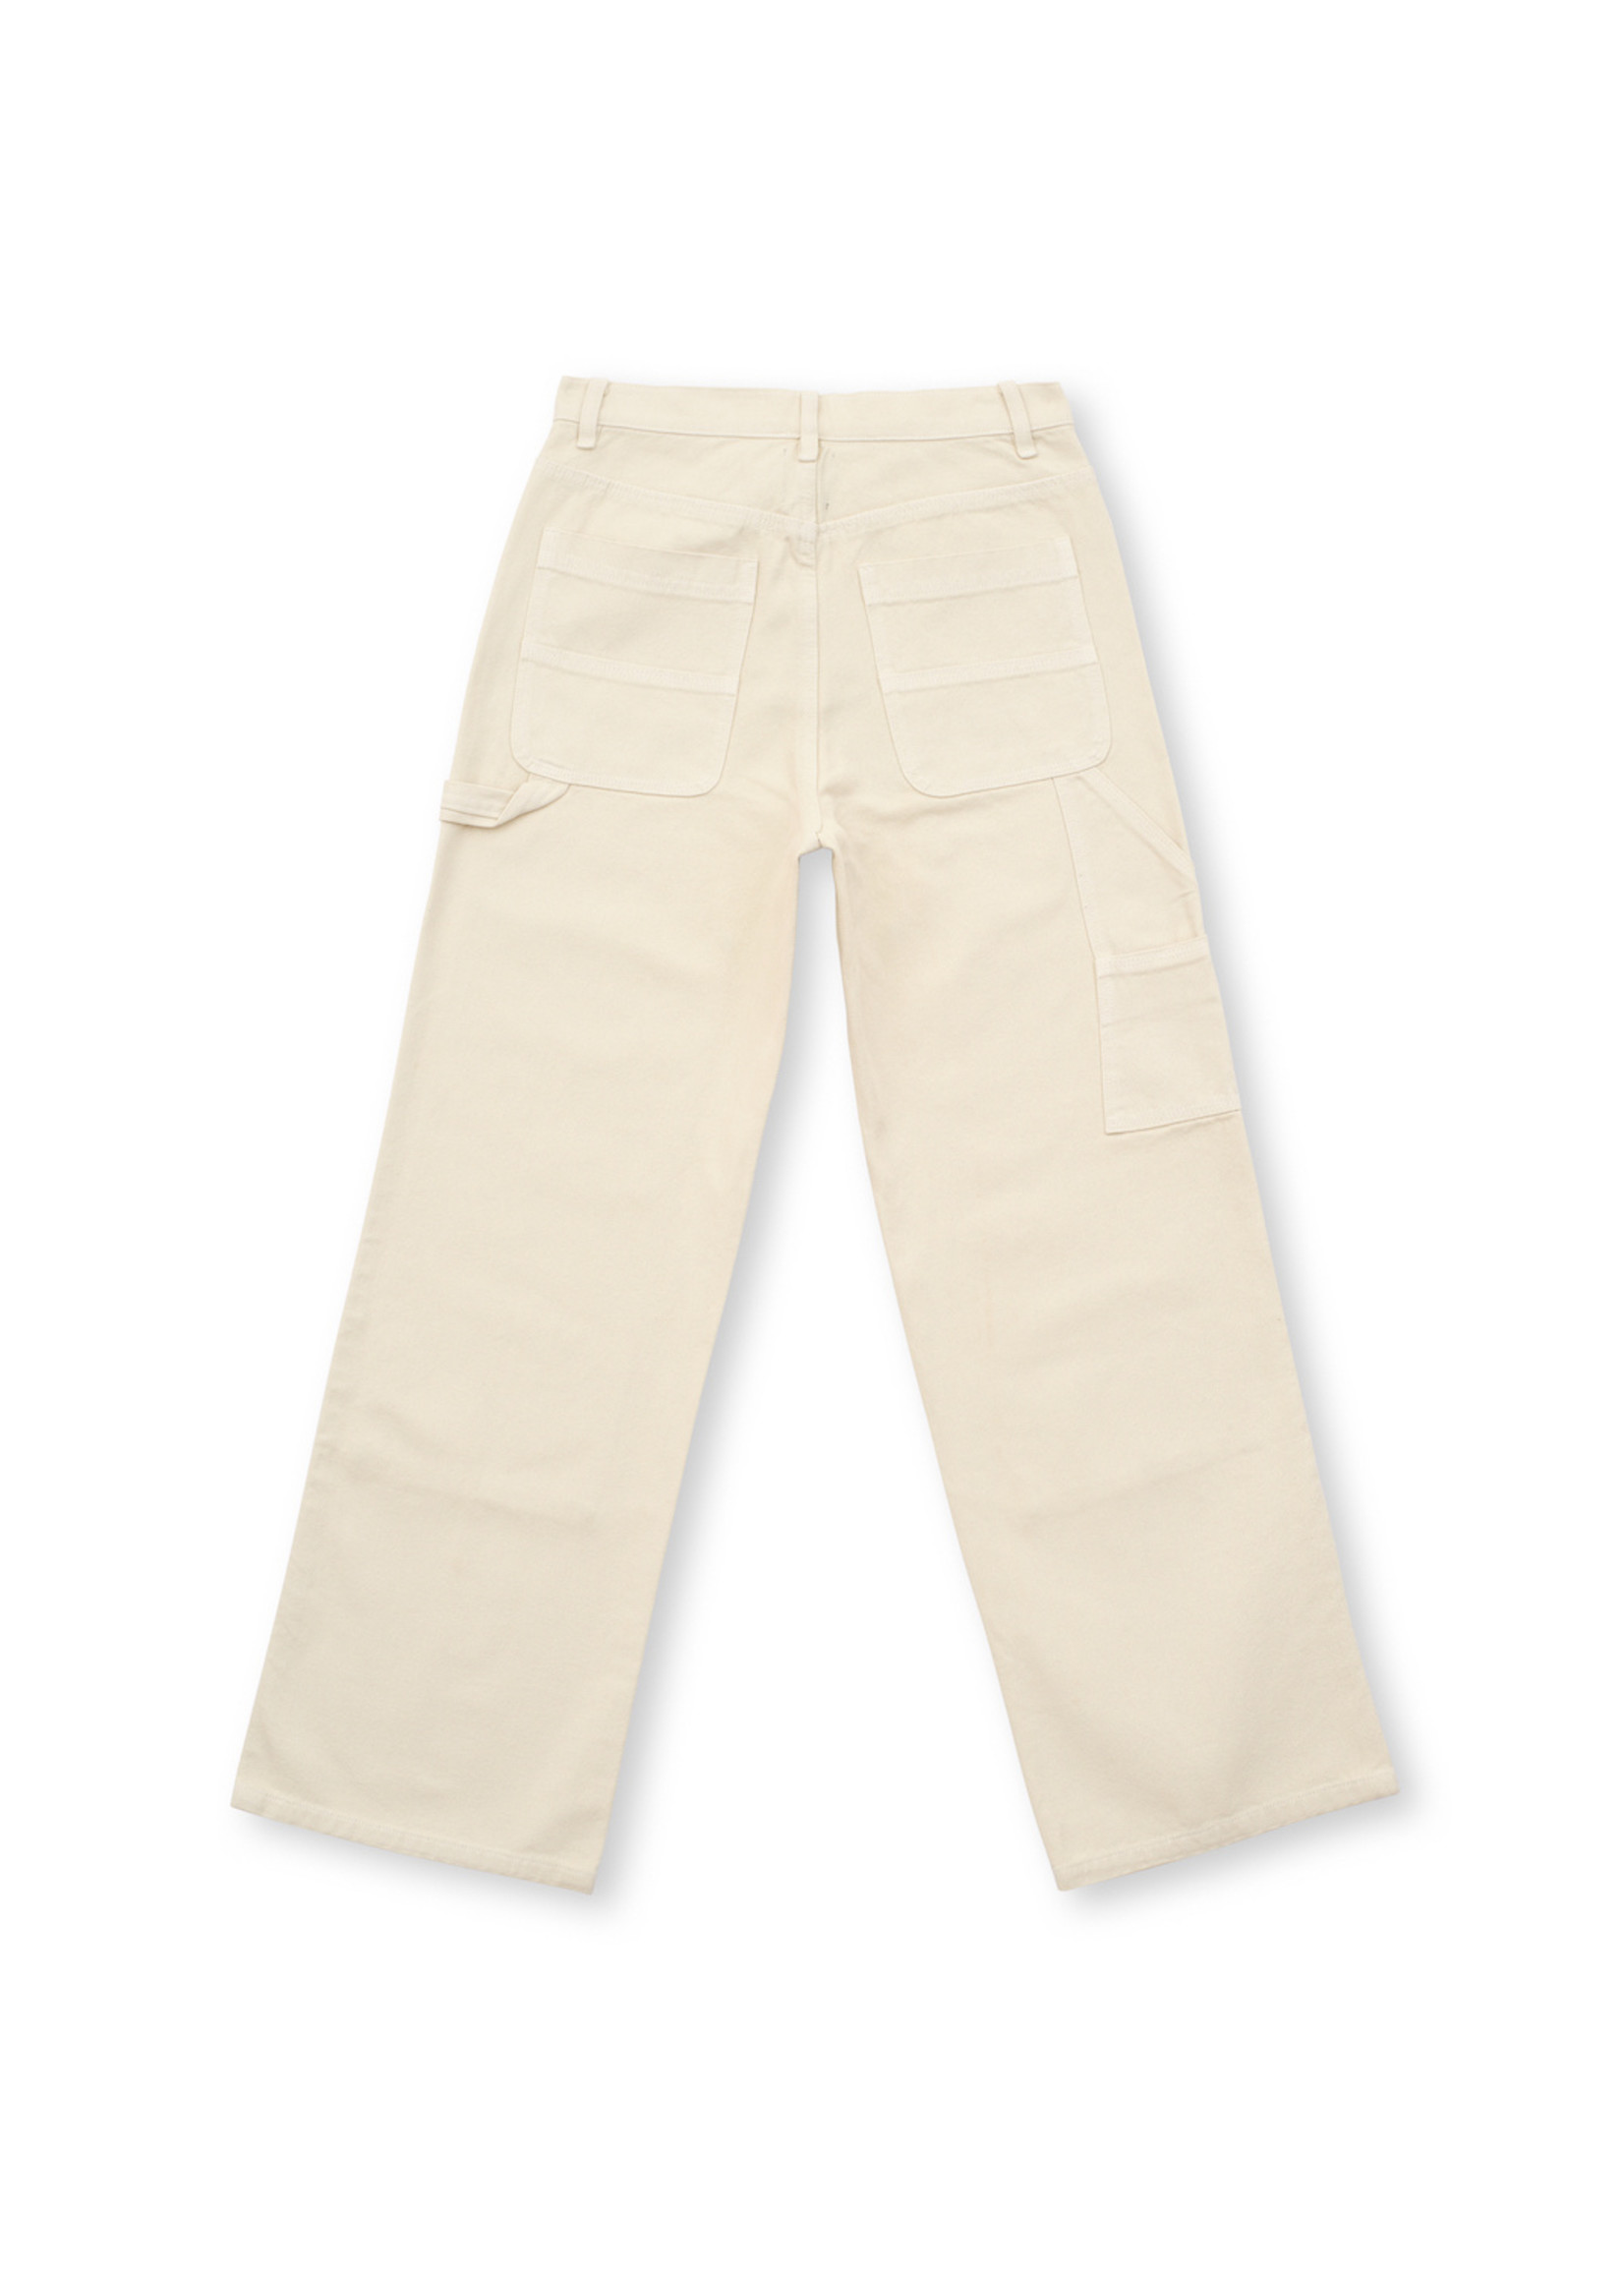 Brain Dead Women's Double Knee Utility Pant in Natural